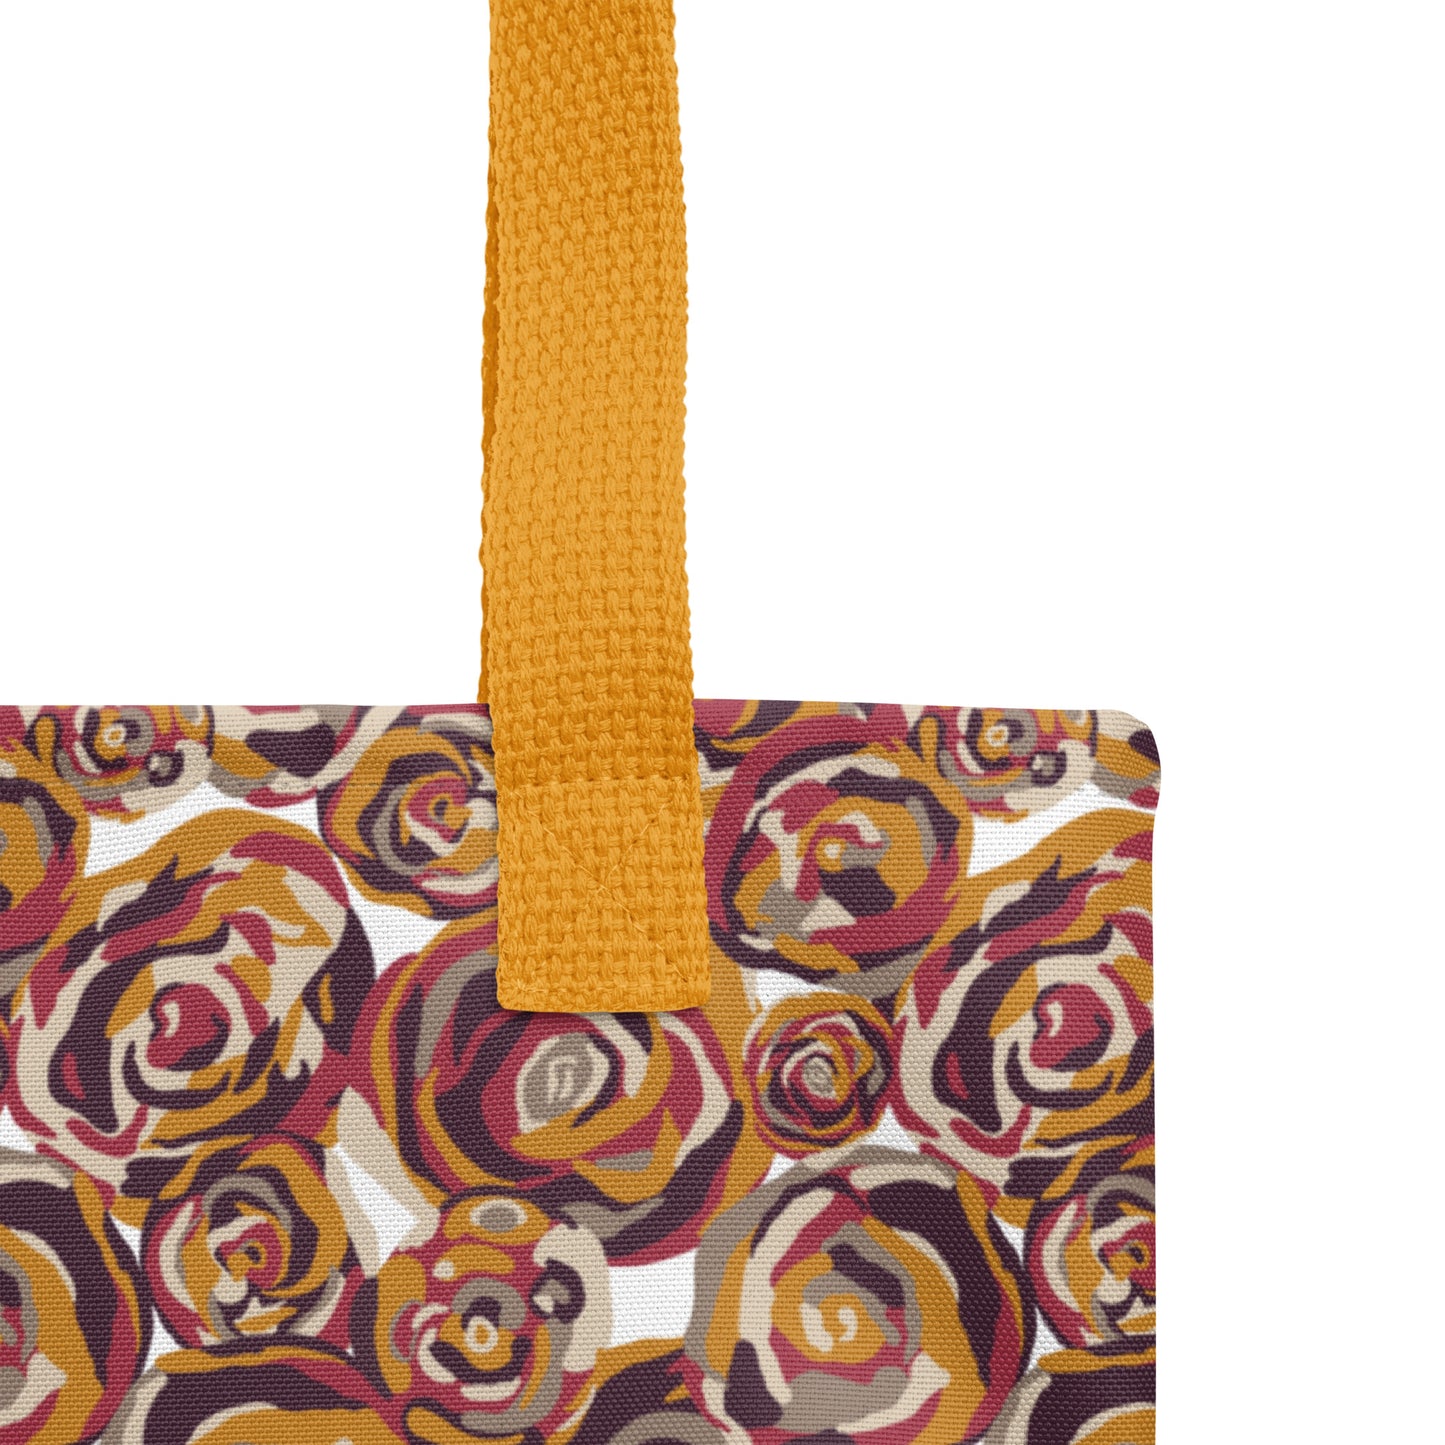 Shop Roses Are Red Tote Bag with yellow straps by Boogs & Boop.